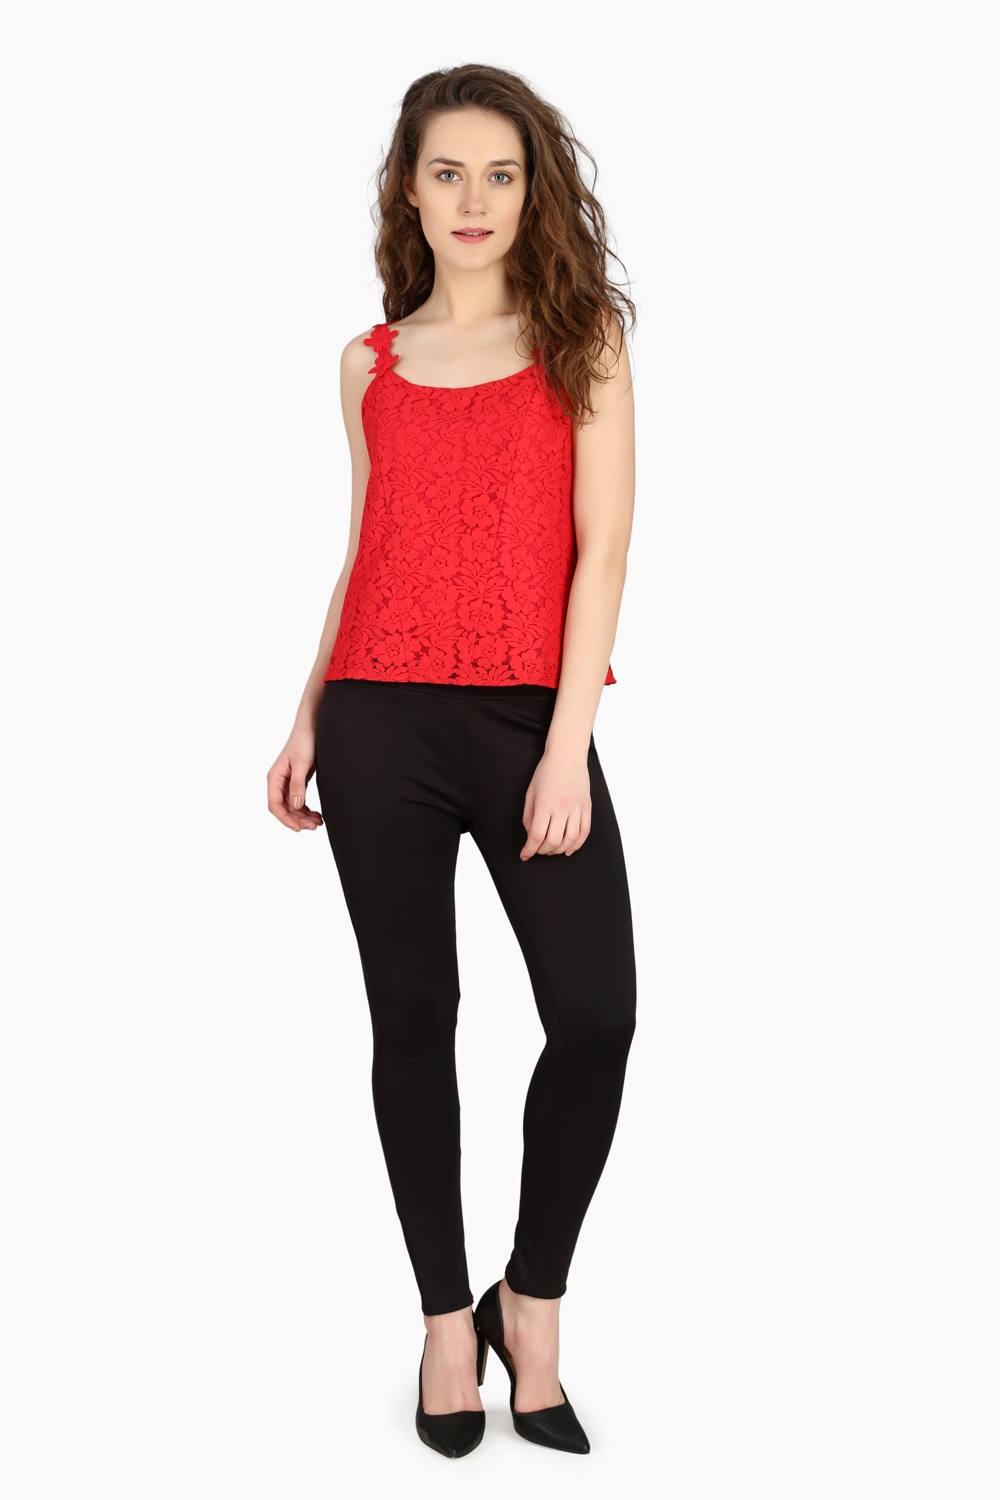 Red Lace Spaghetti Top - Back